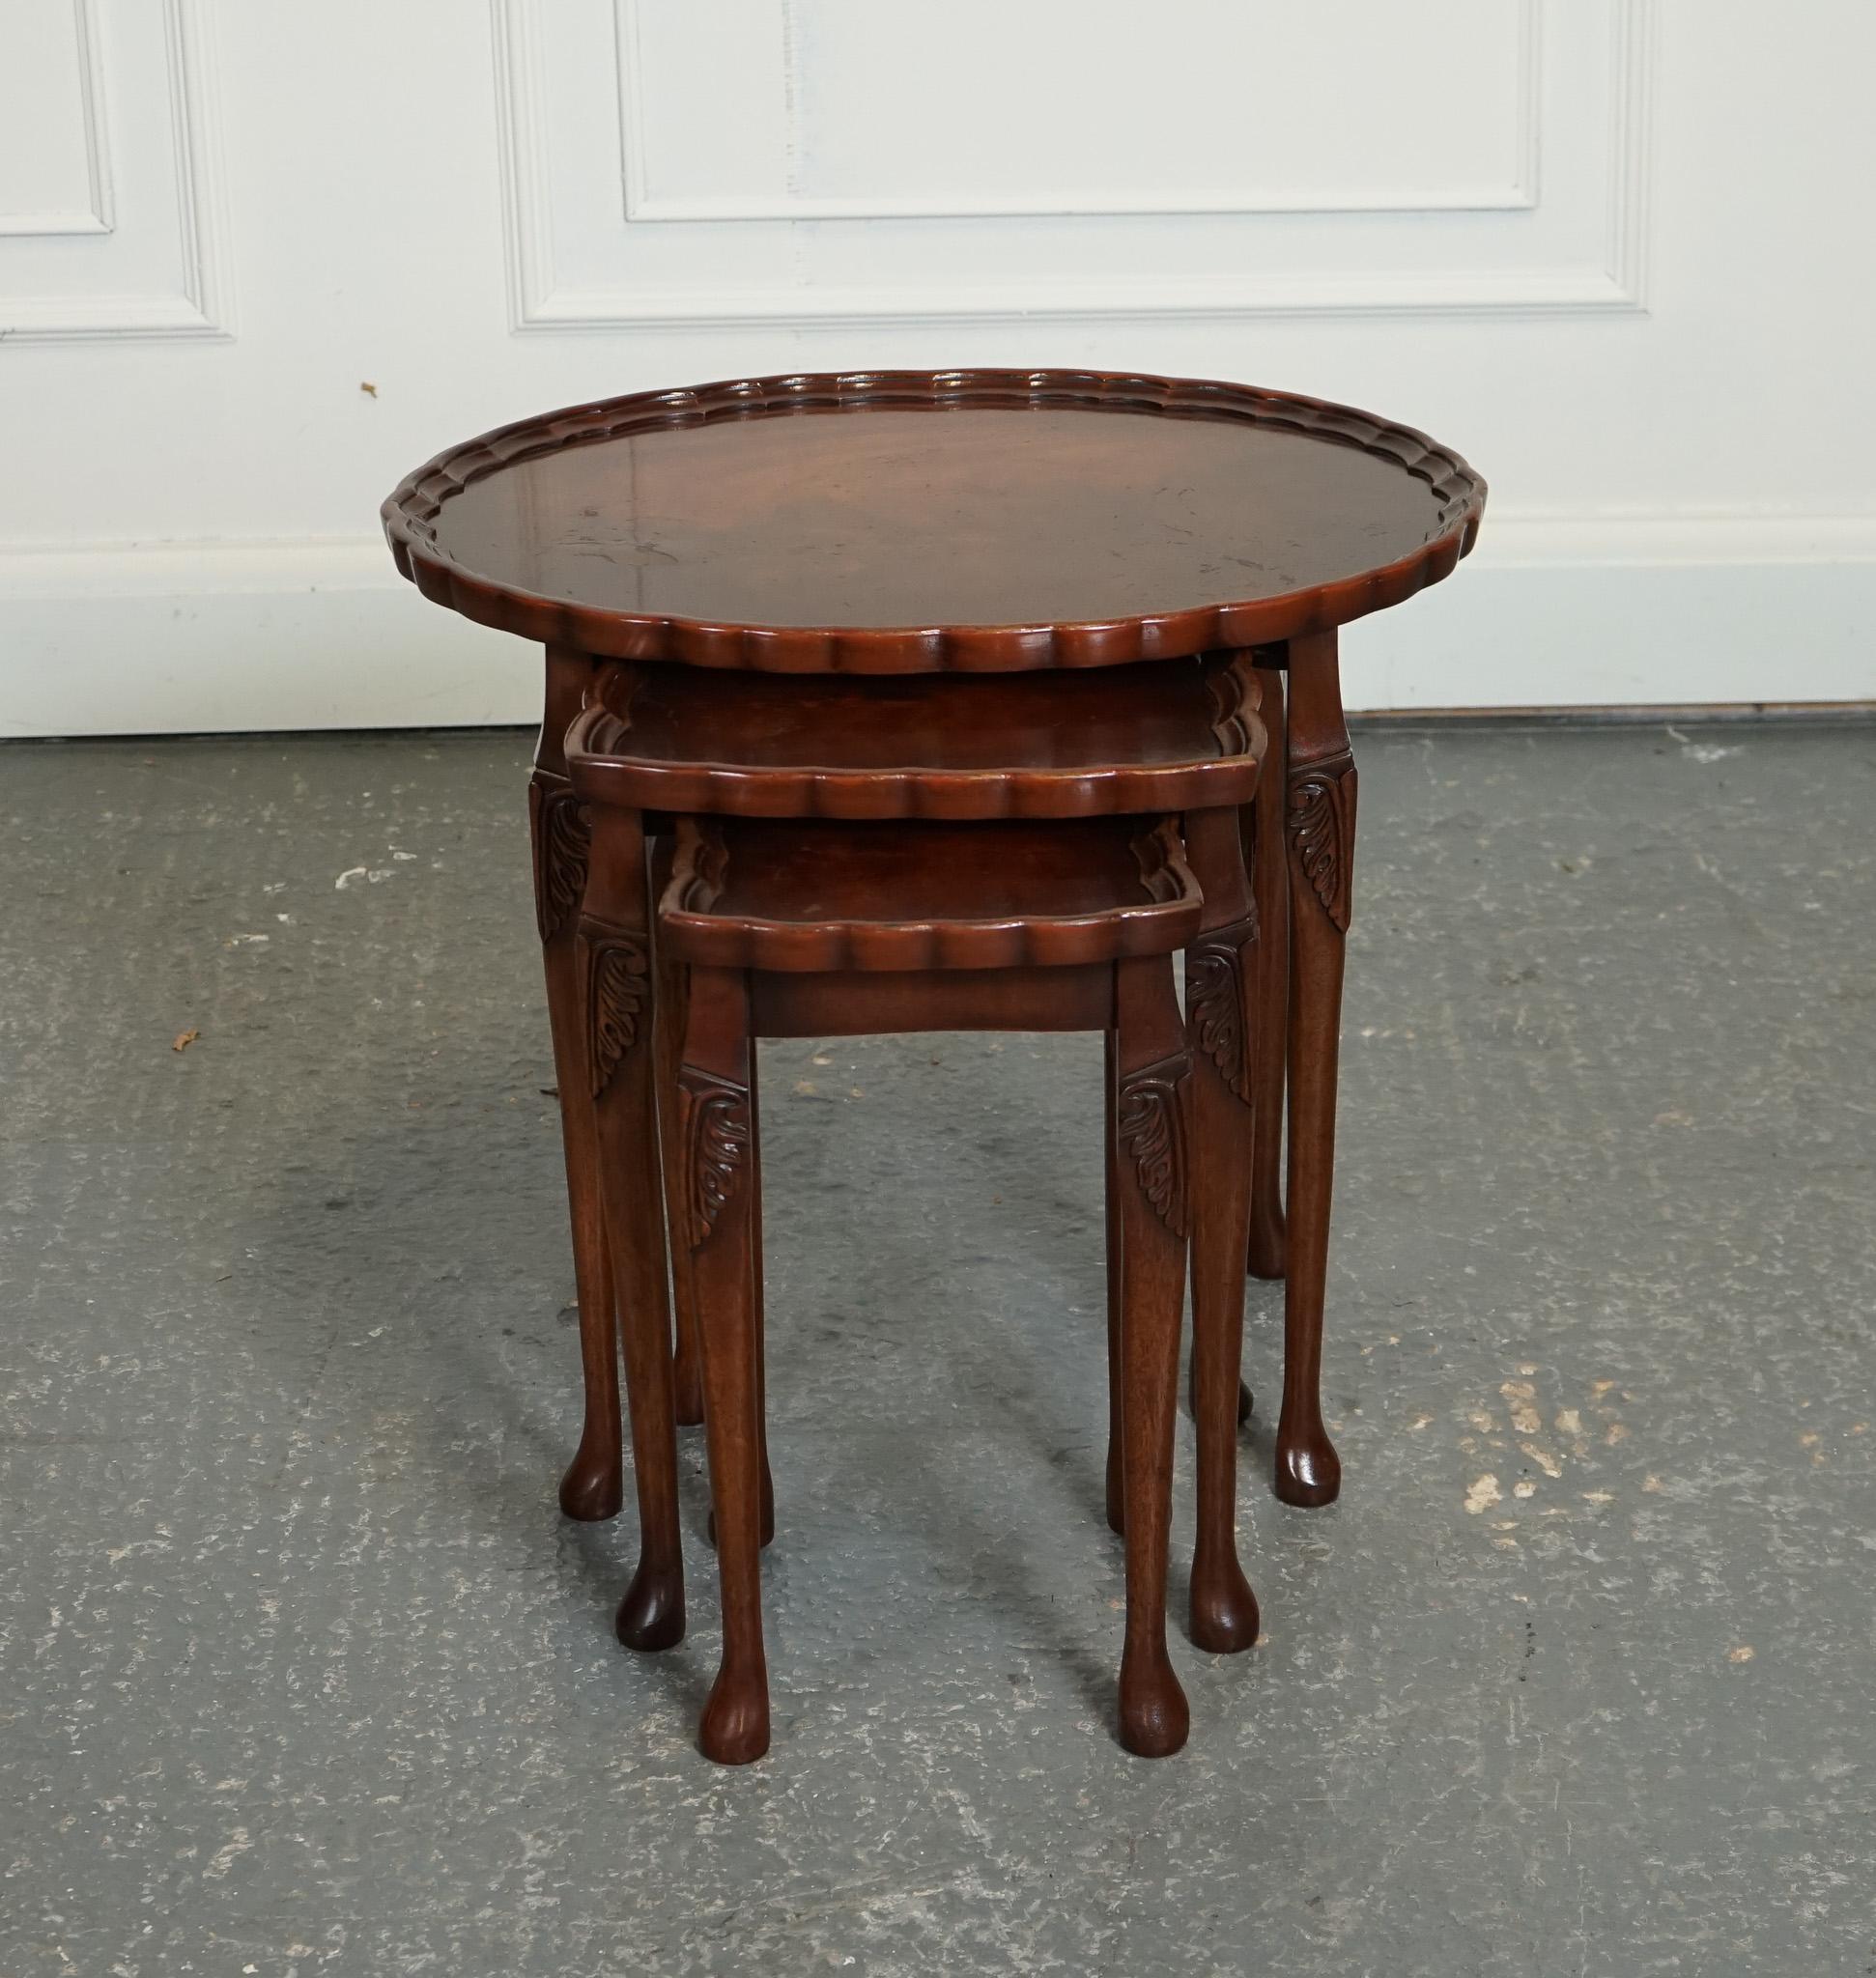 
We are delighted to offer for sale this Lovely Vintage Bevan Funnell Pie Crust Nest of Tables.

The vintage Bevan Funnel nest of tables is a set of three charming and unique tables with curved, pie crust tops. Made from high-quality wood, these